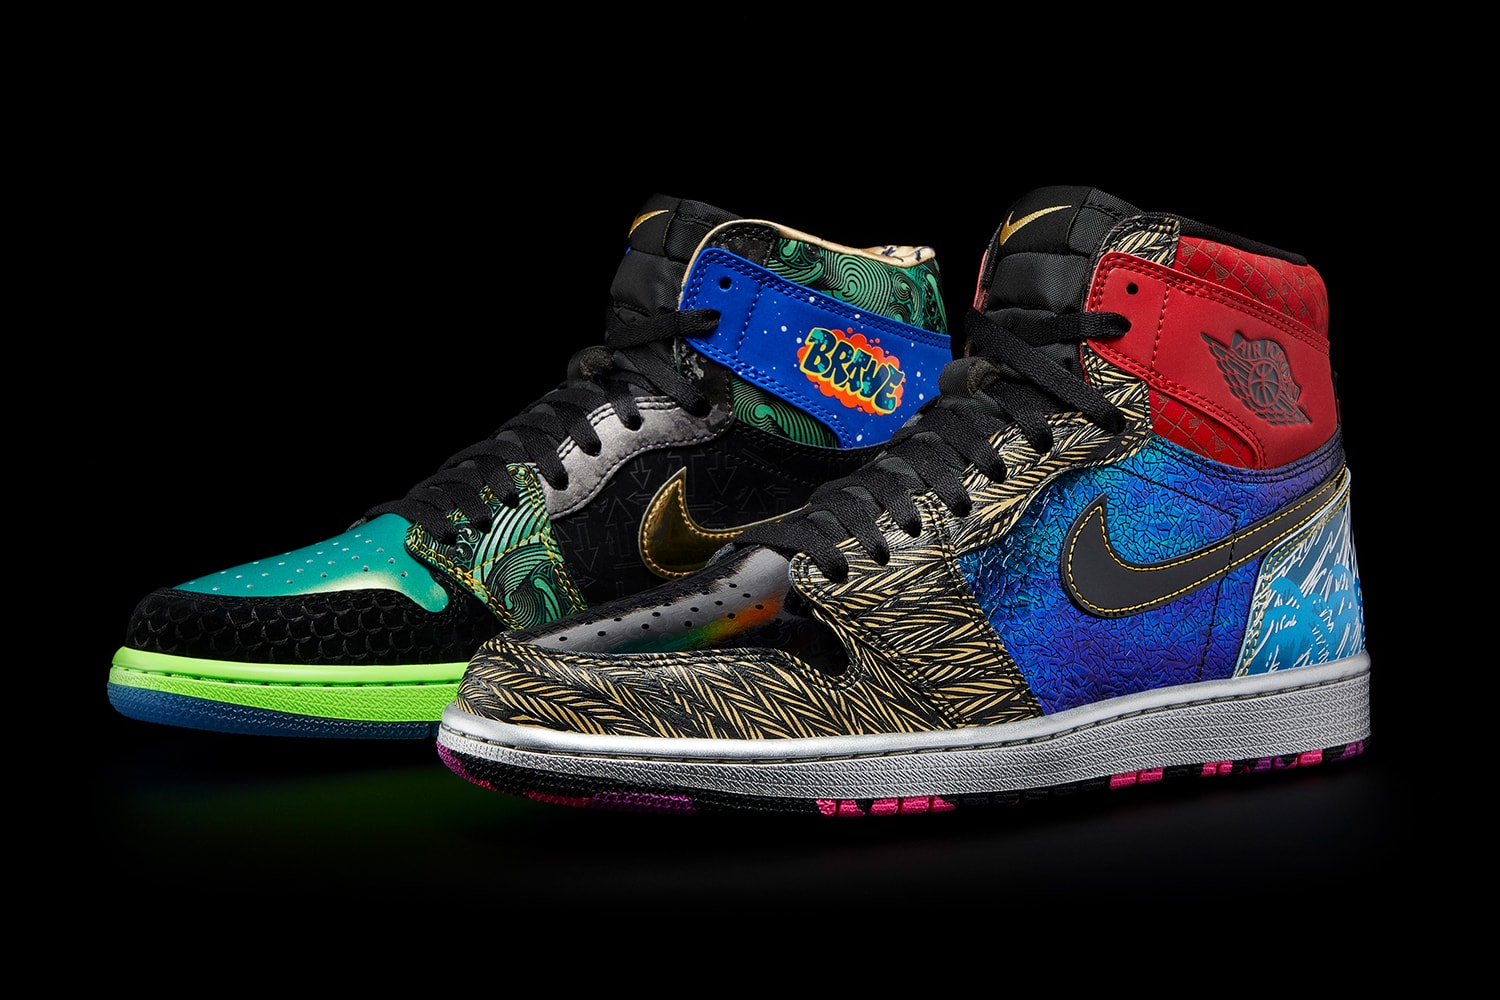 Nike Doernbecher Freestyle Air Jordan 1 Retro High OG What The Official Look Release Info Buy Price 